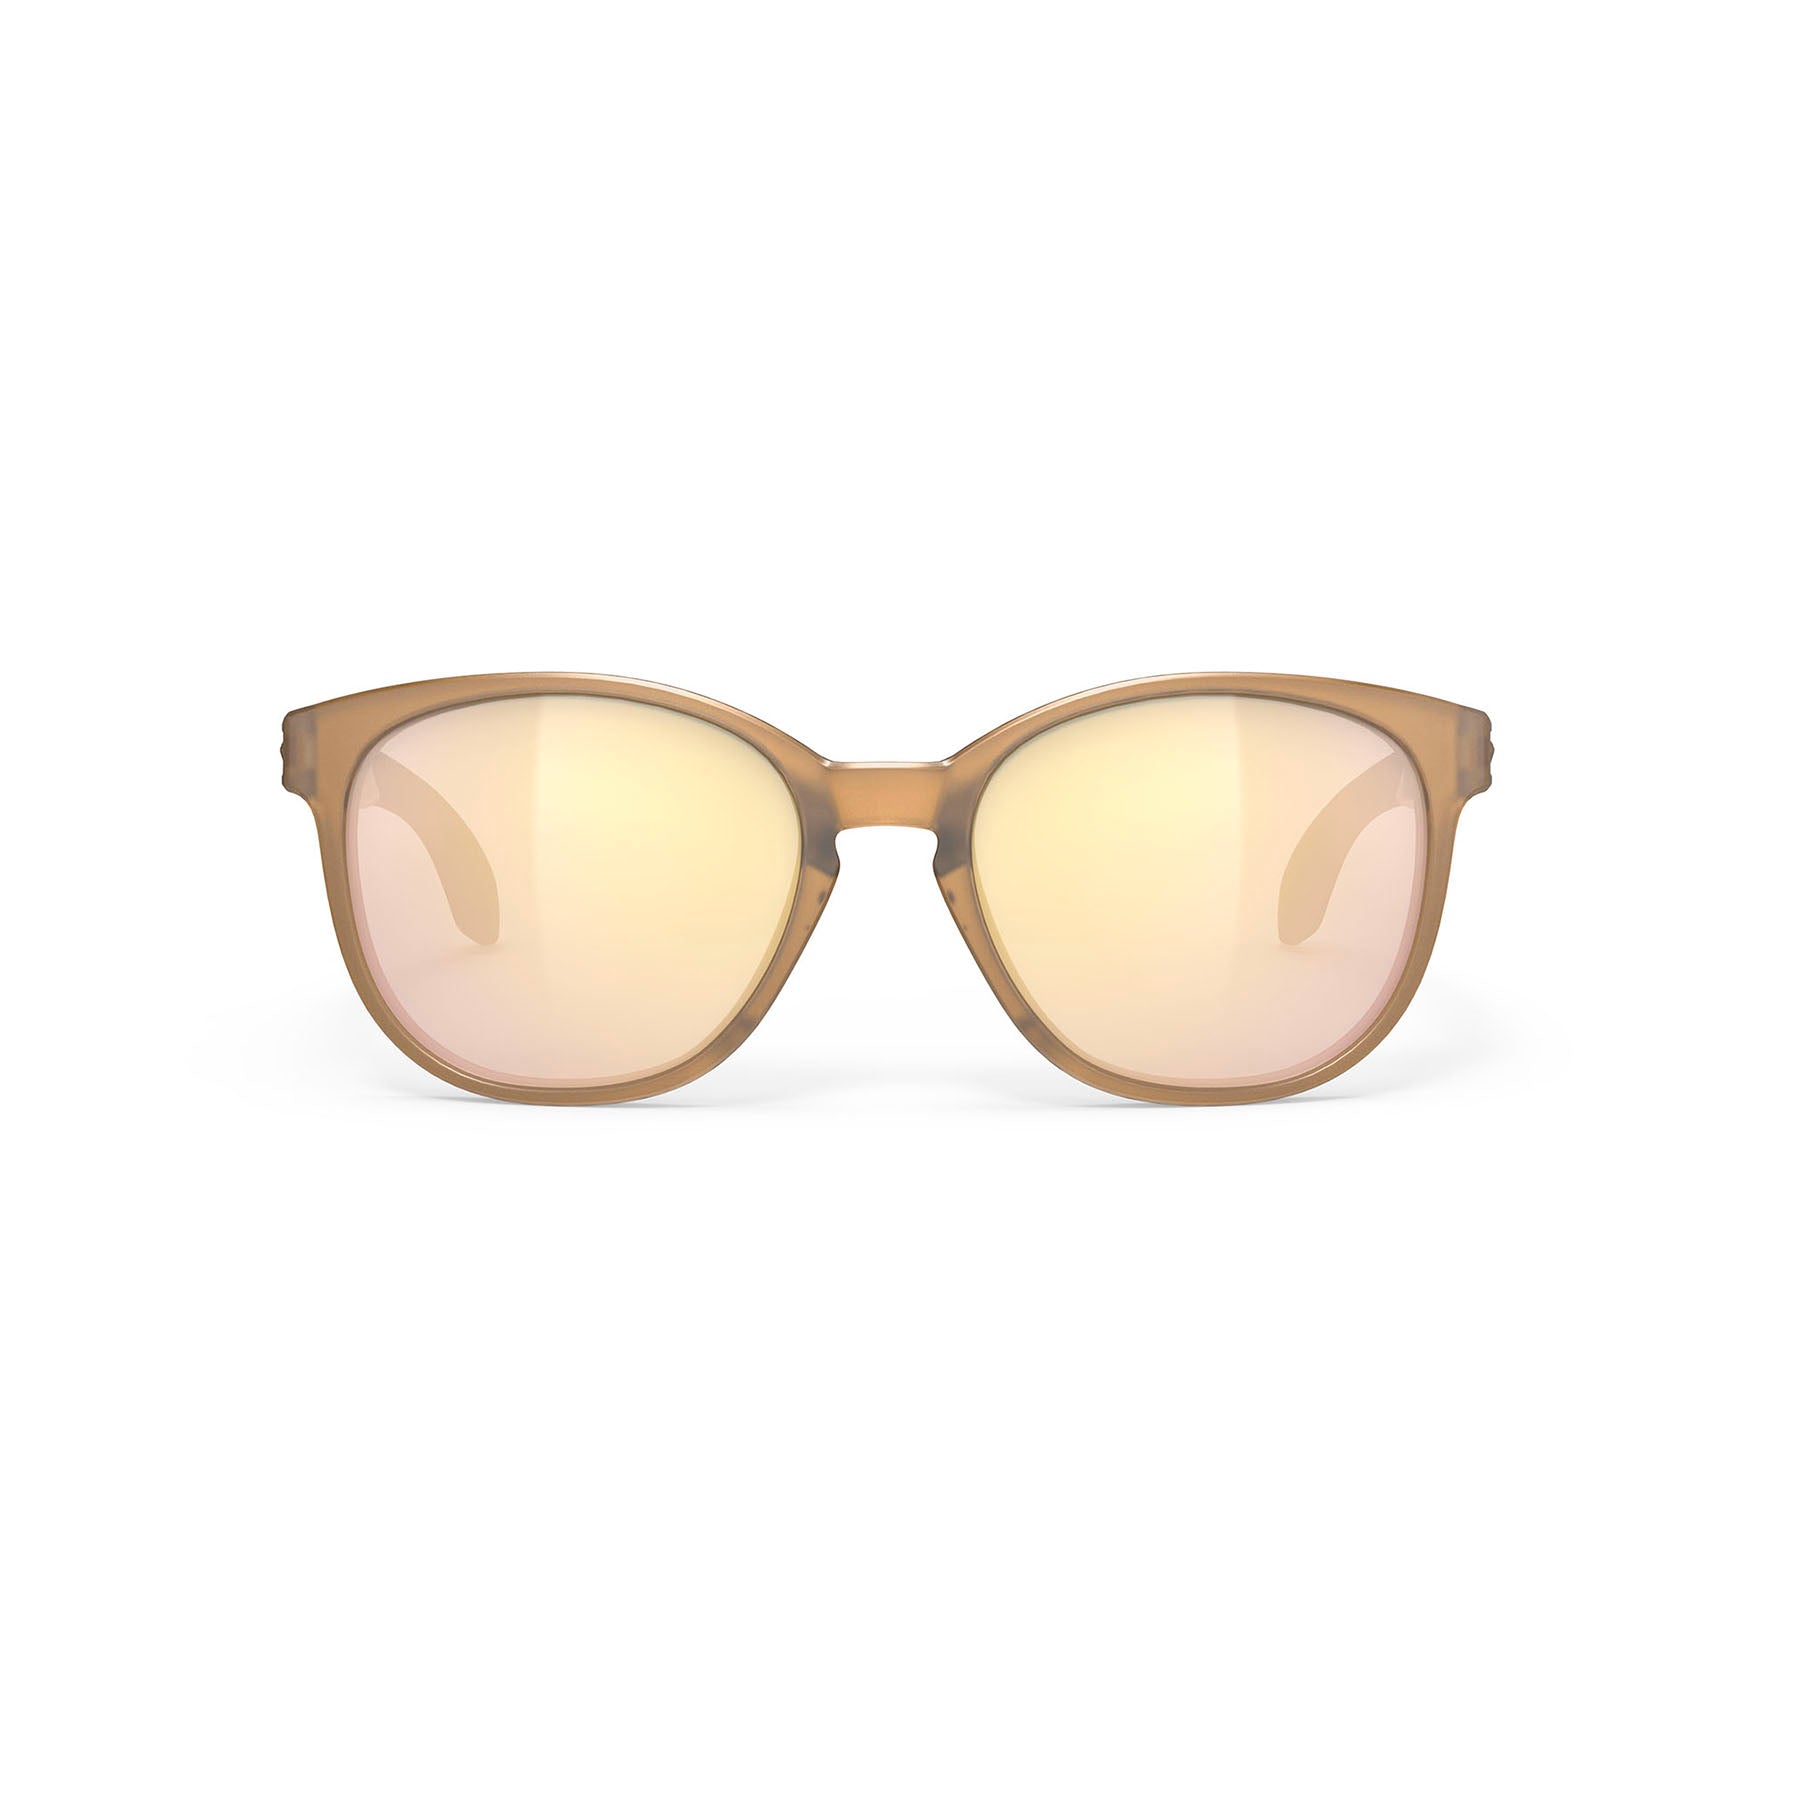 Rudy Project Lightflow B prescription ready active lifestyle sunglasses#color_lightflow-b-ice-gold-matte-frame-with-multilaser-gold-lenses